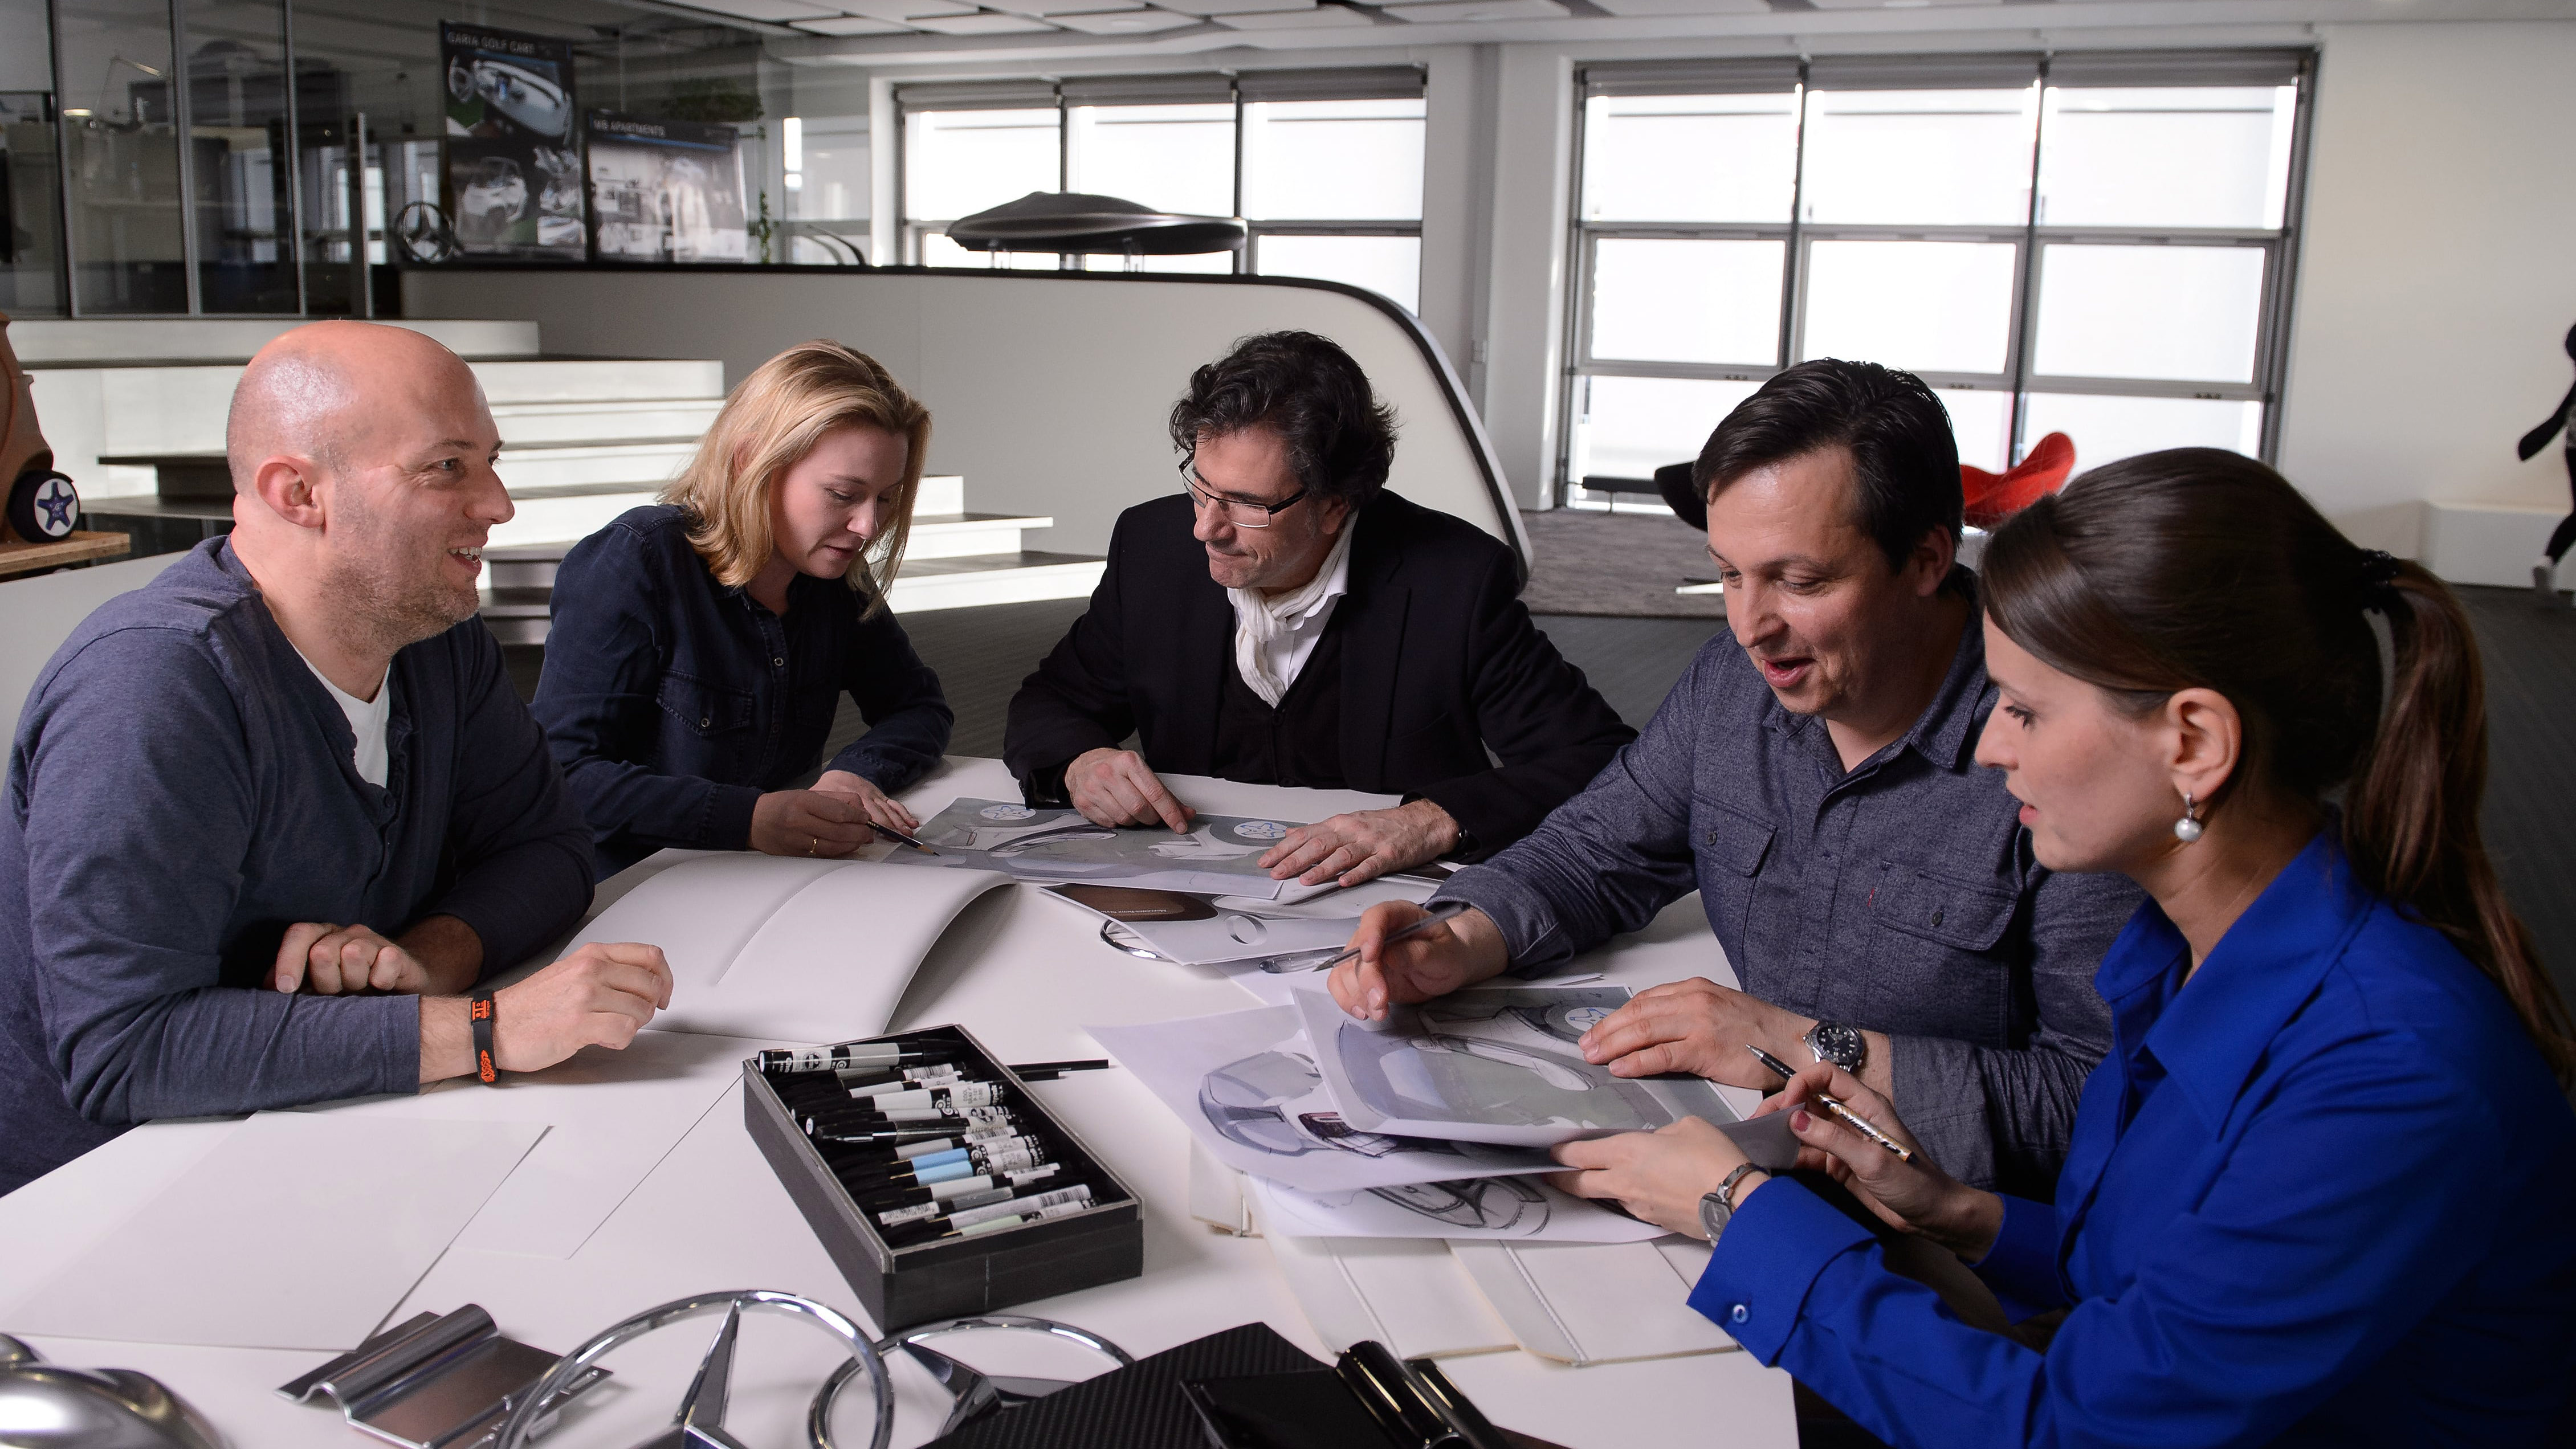 Martin Bremer (center) leads the Creation Brand Experience team for Mercedes-Benz Group.